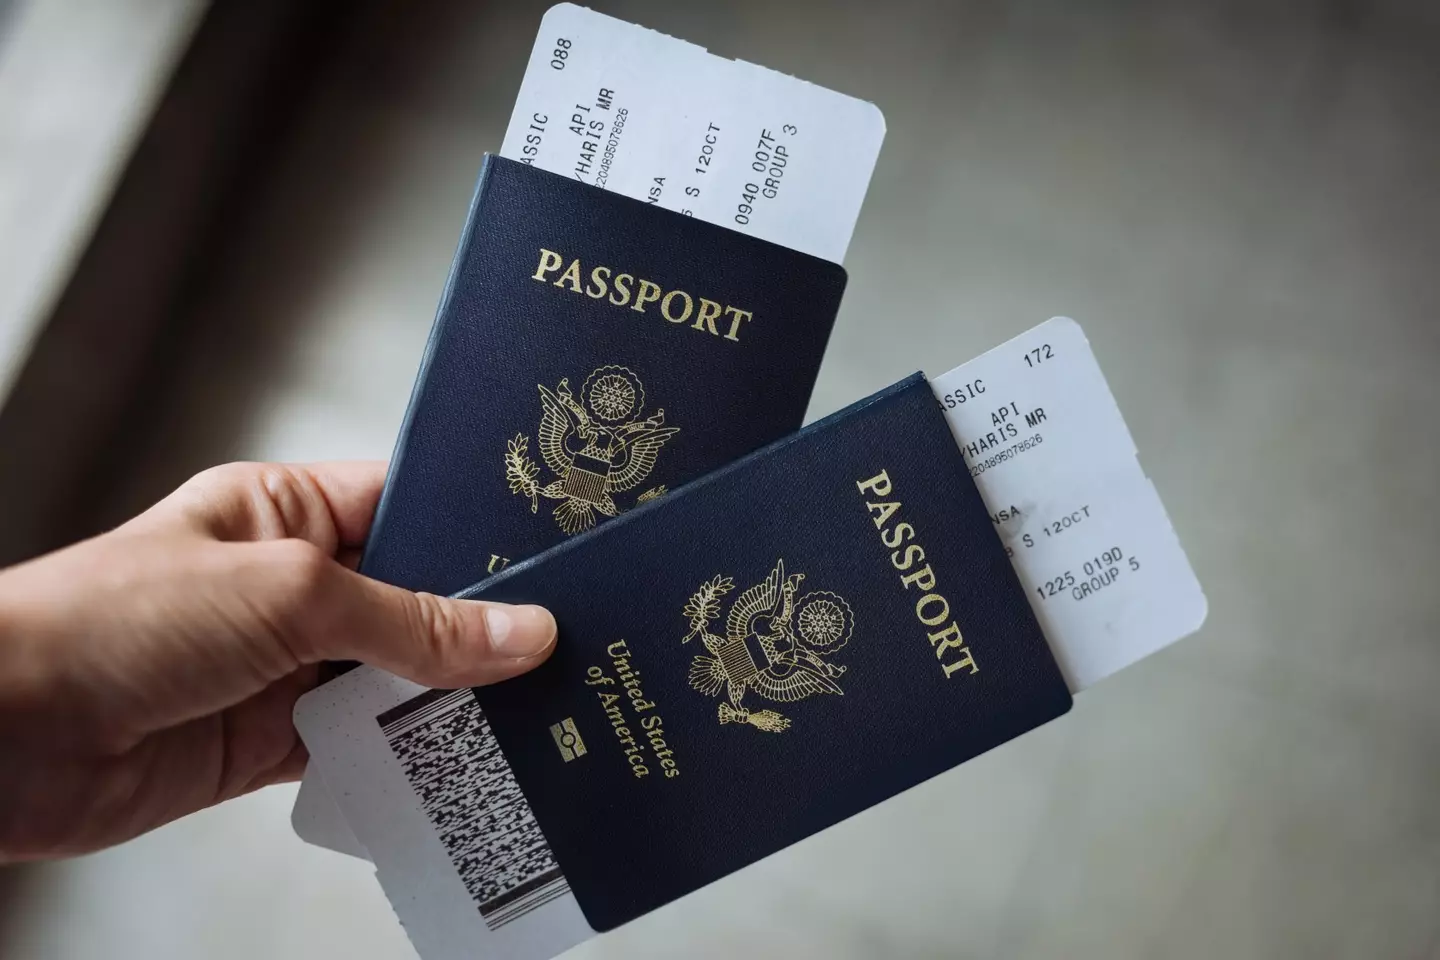 Hackers can gain access to your accounts by scanning a boarding pass barcode.